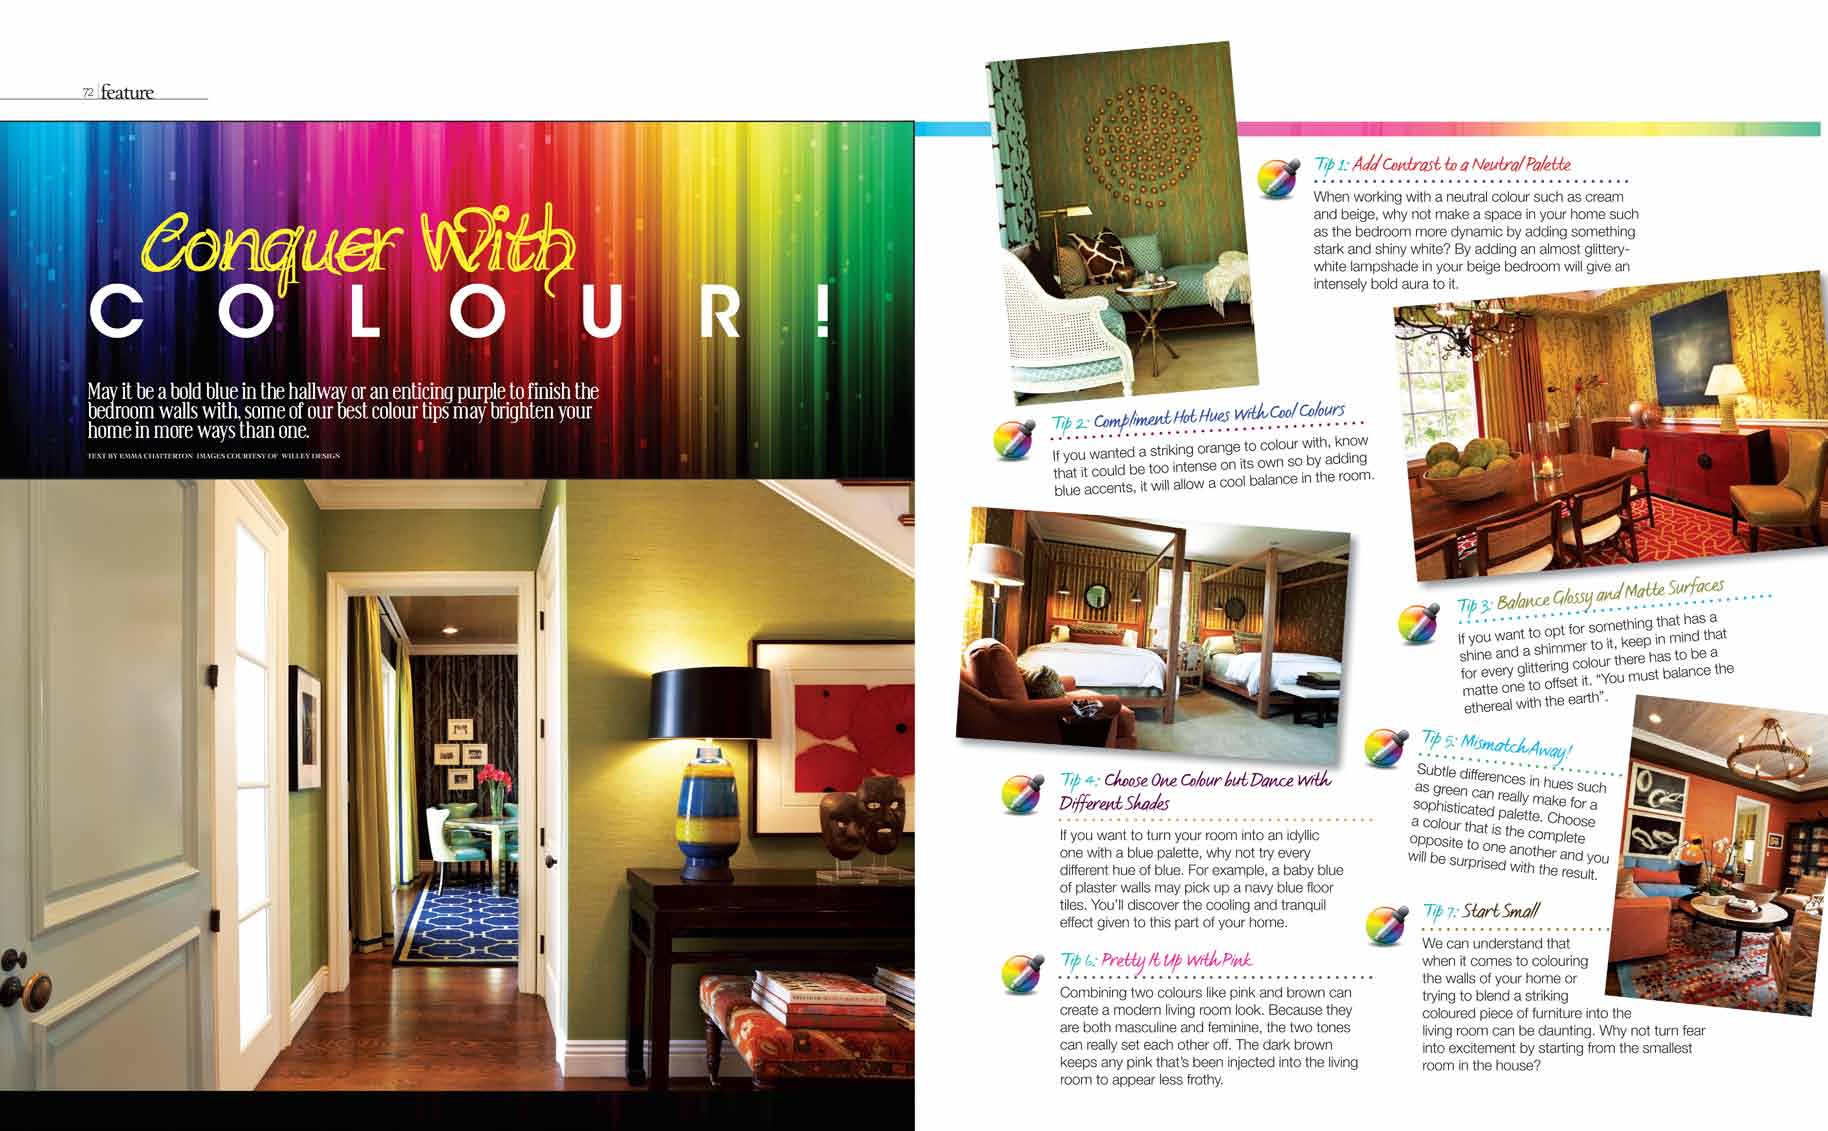 Home Concepts Malaysia 2012 JanFeb - Full Article low-res_Page_6.jpg